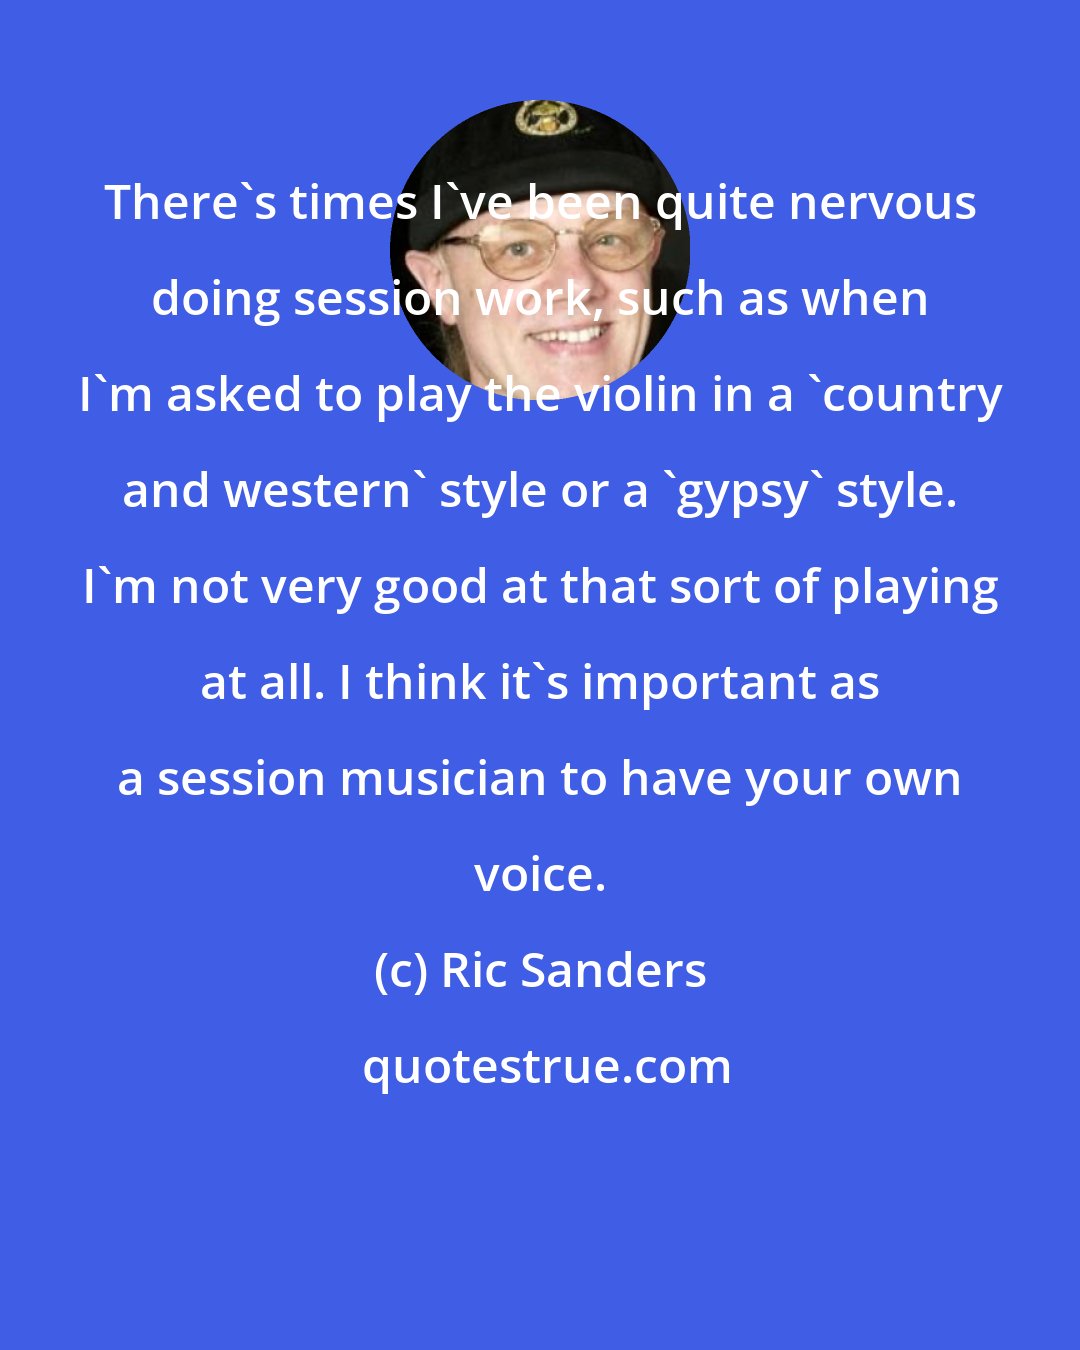 Ric Sanders: There's times I've been quite nervous doing session work, such as when I'm asked to play the violin in a 'country and western' style or a 'gypsy' style. I'm not very good at that sort of playing at all. I think it's important as a session musician to have your own voice.